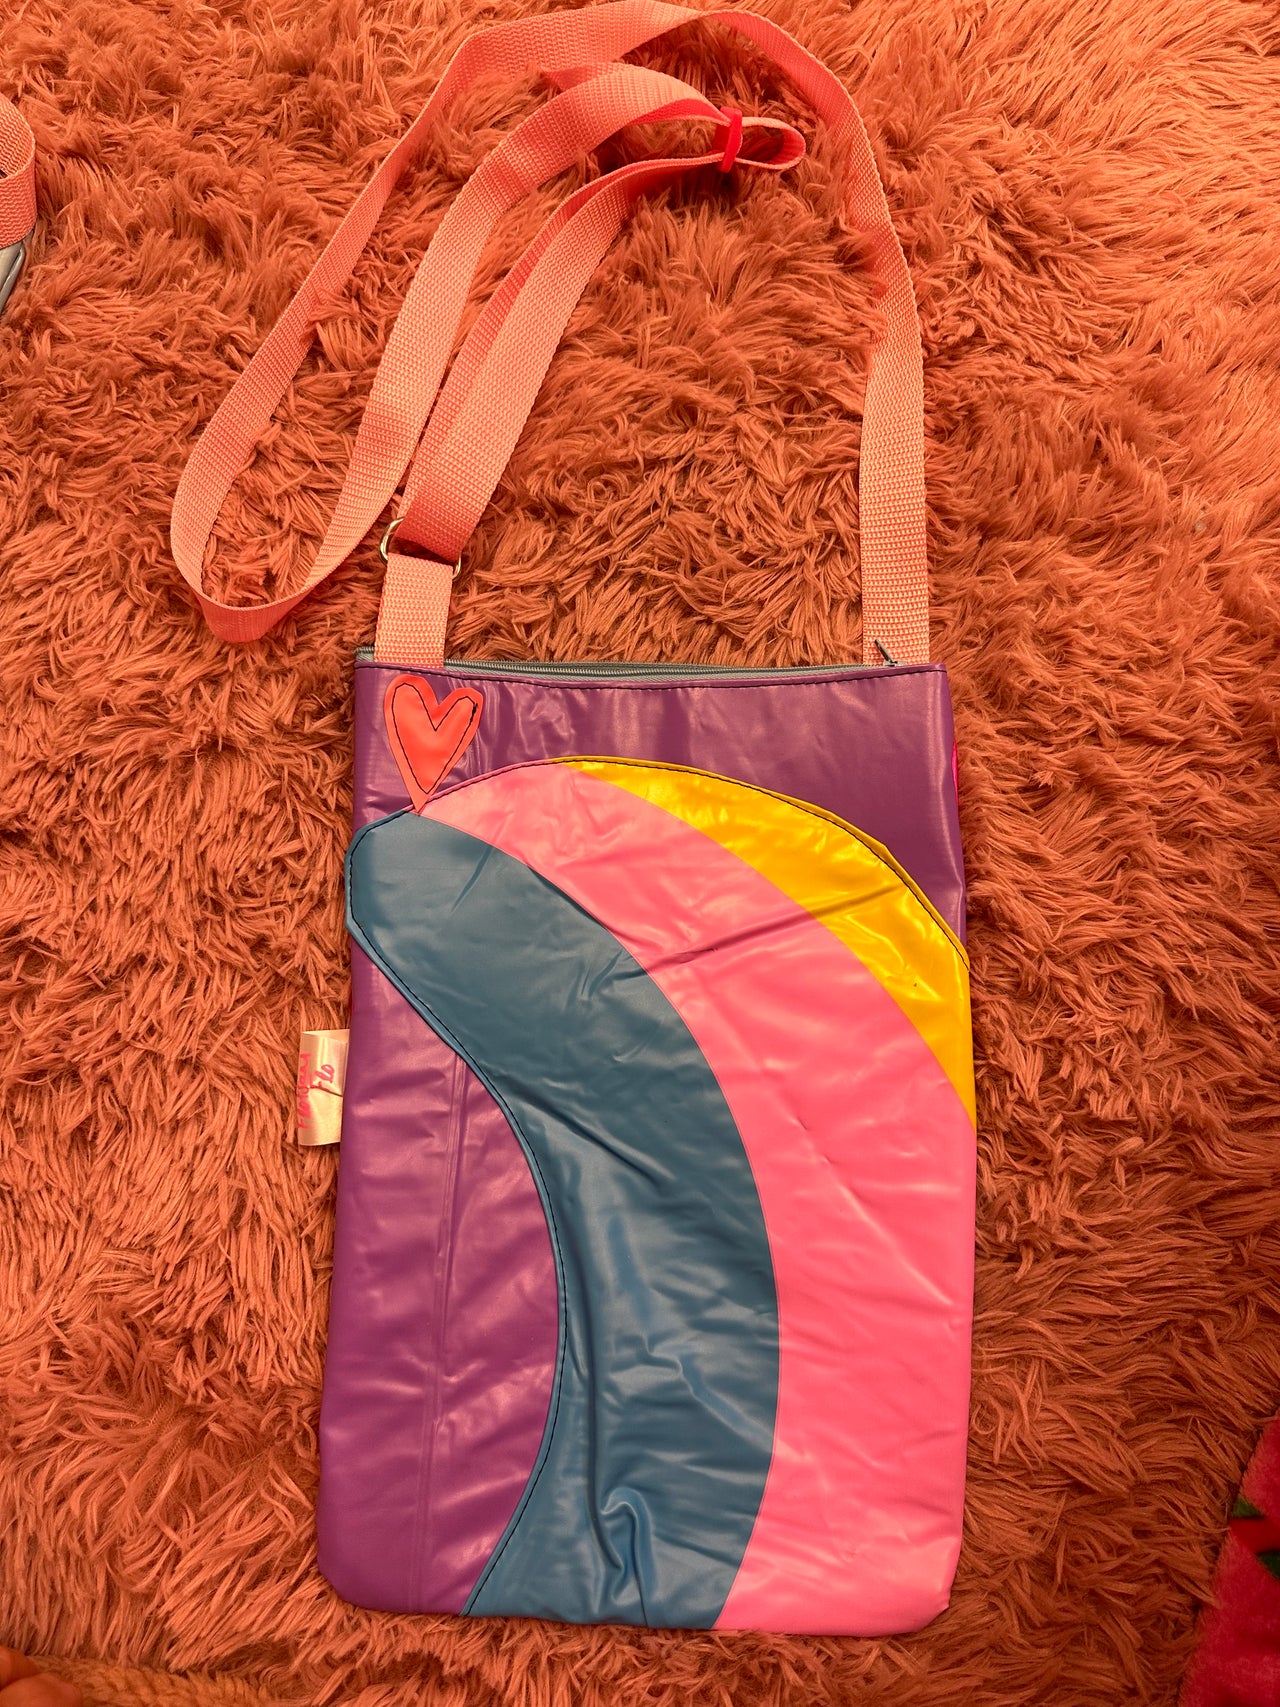 I used to be a Banner and Inflatable - Rainbow Cross Body Bag